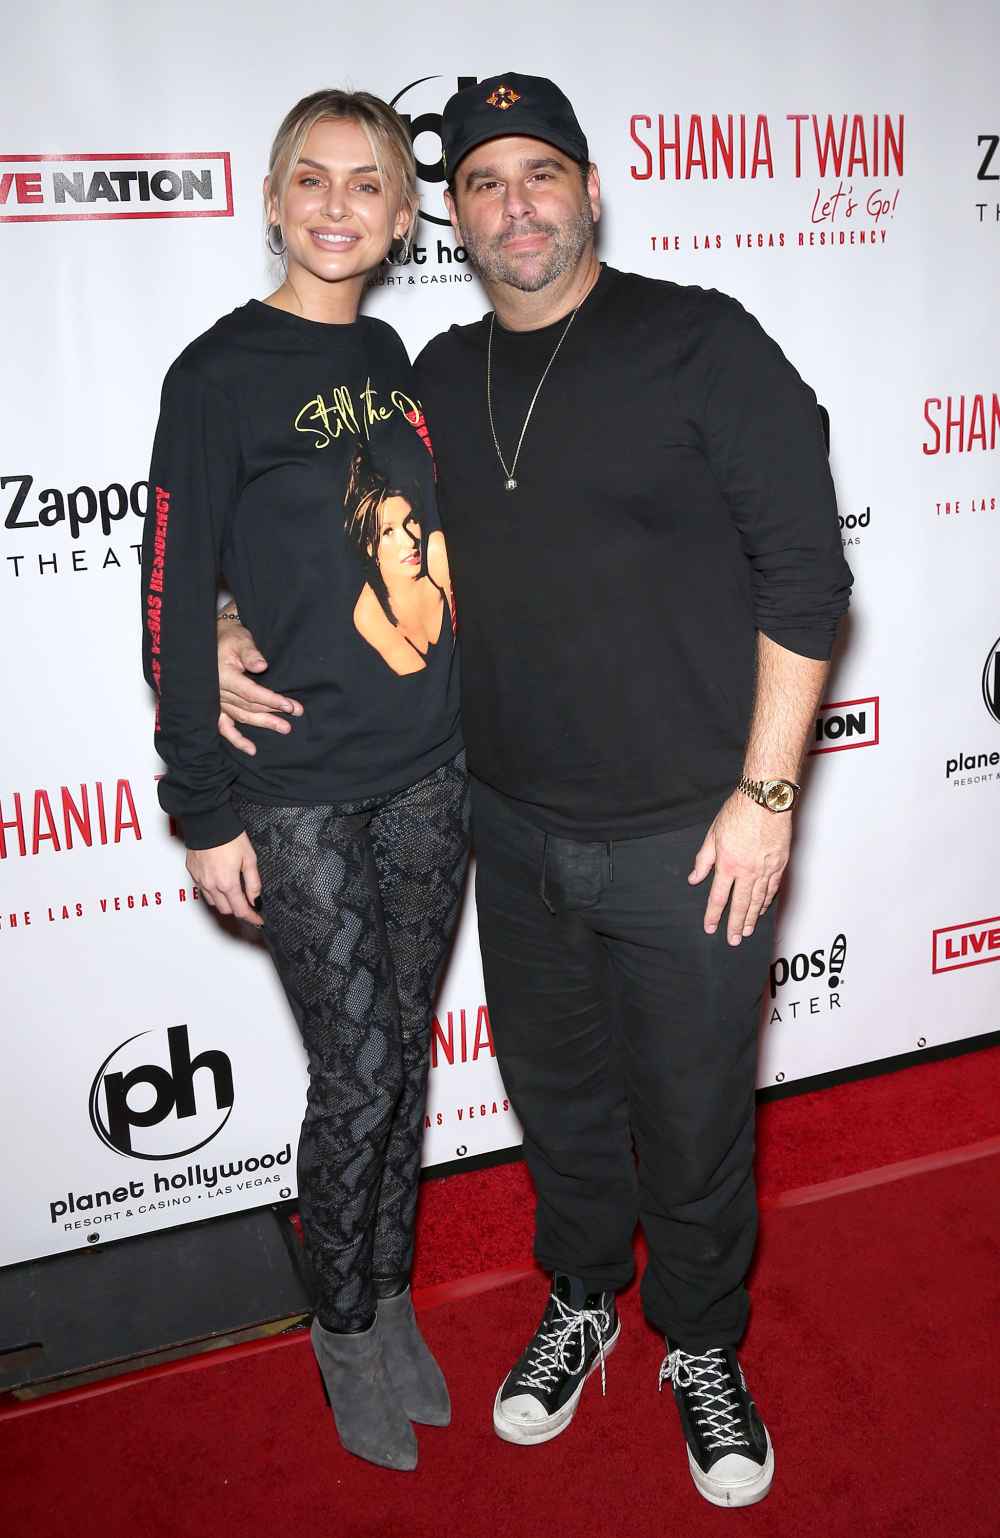 Lala Kent Is Pregnant, Expecting First Child With Fiance Randall Emmett